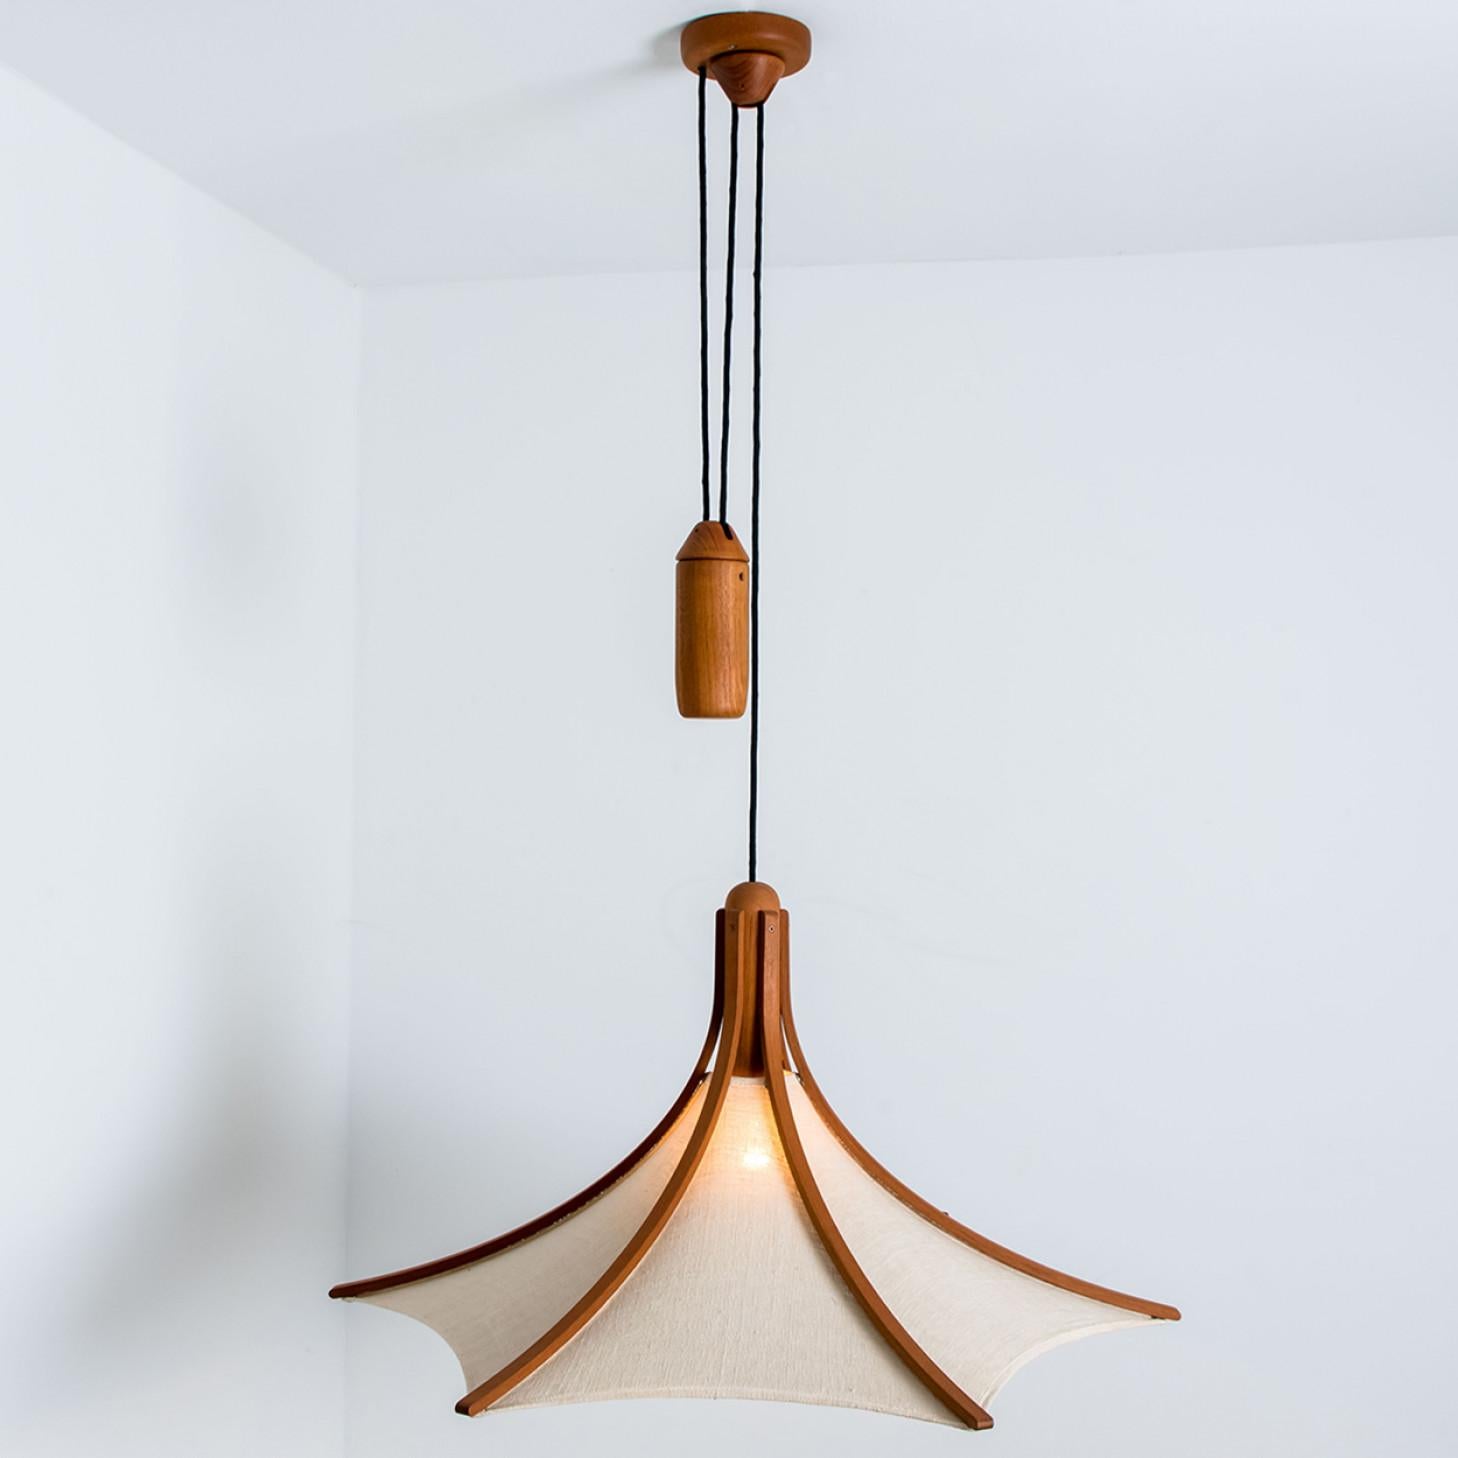 1 of the 2 Wooden Pendant Light with Textile Shade by Domus Germany, 1970s For Sale 10